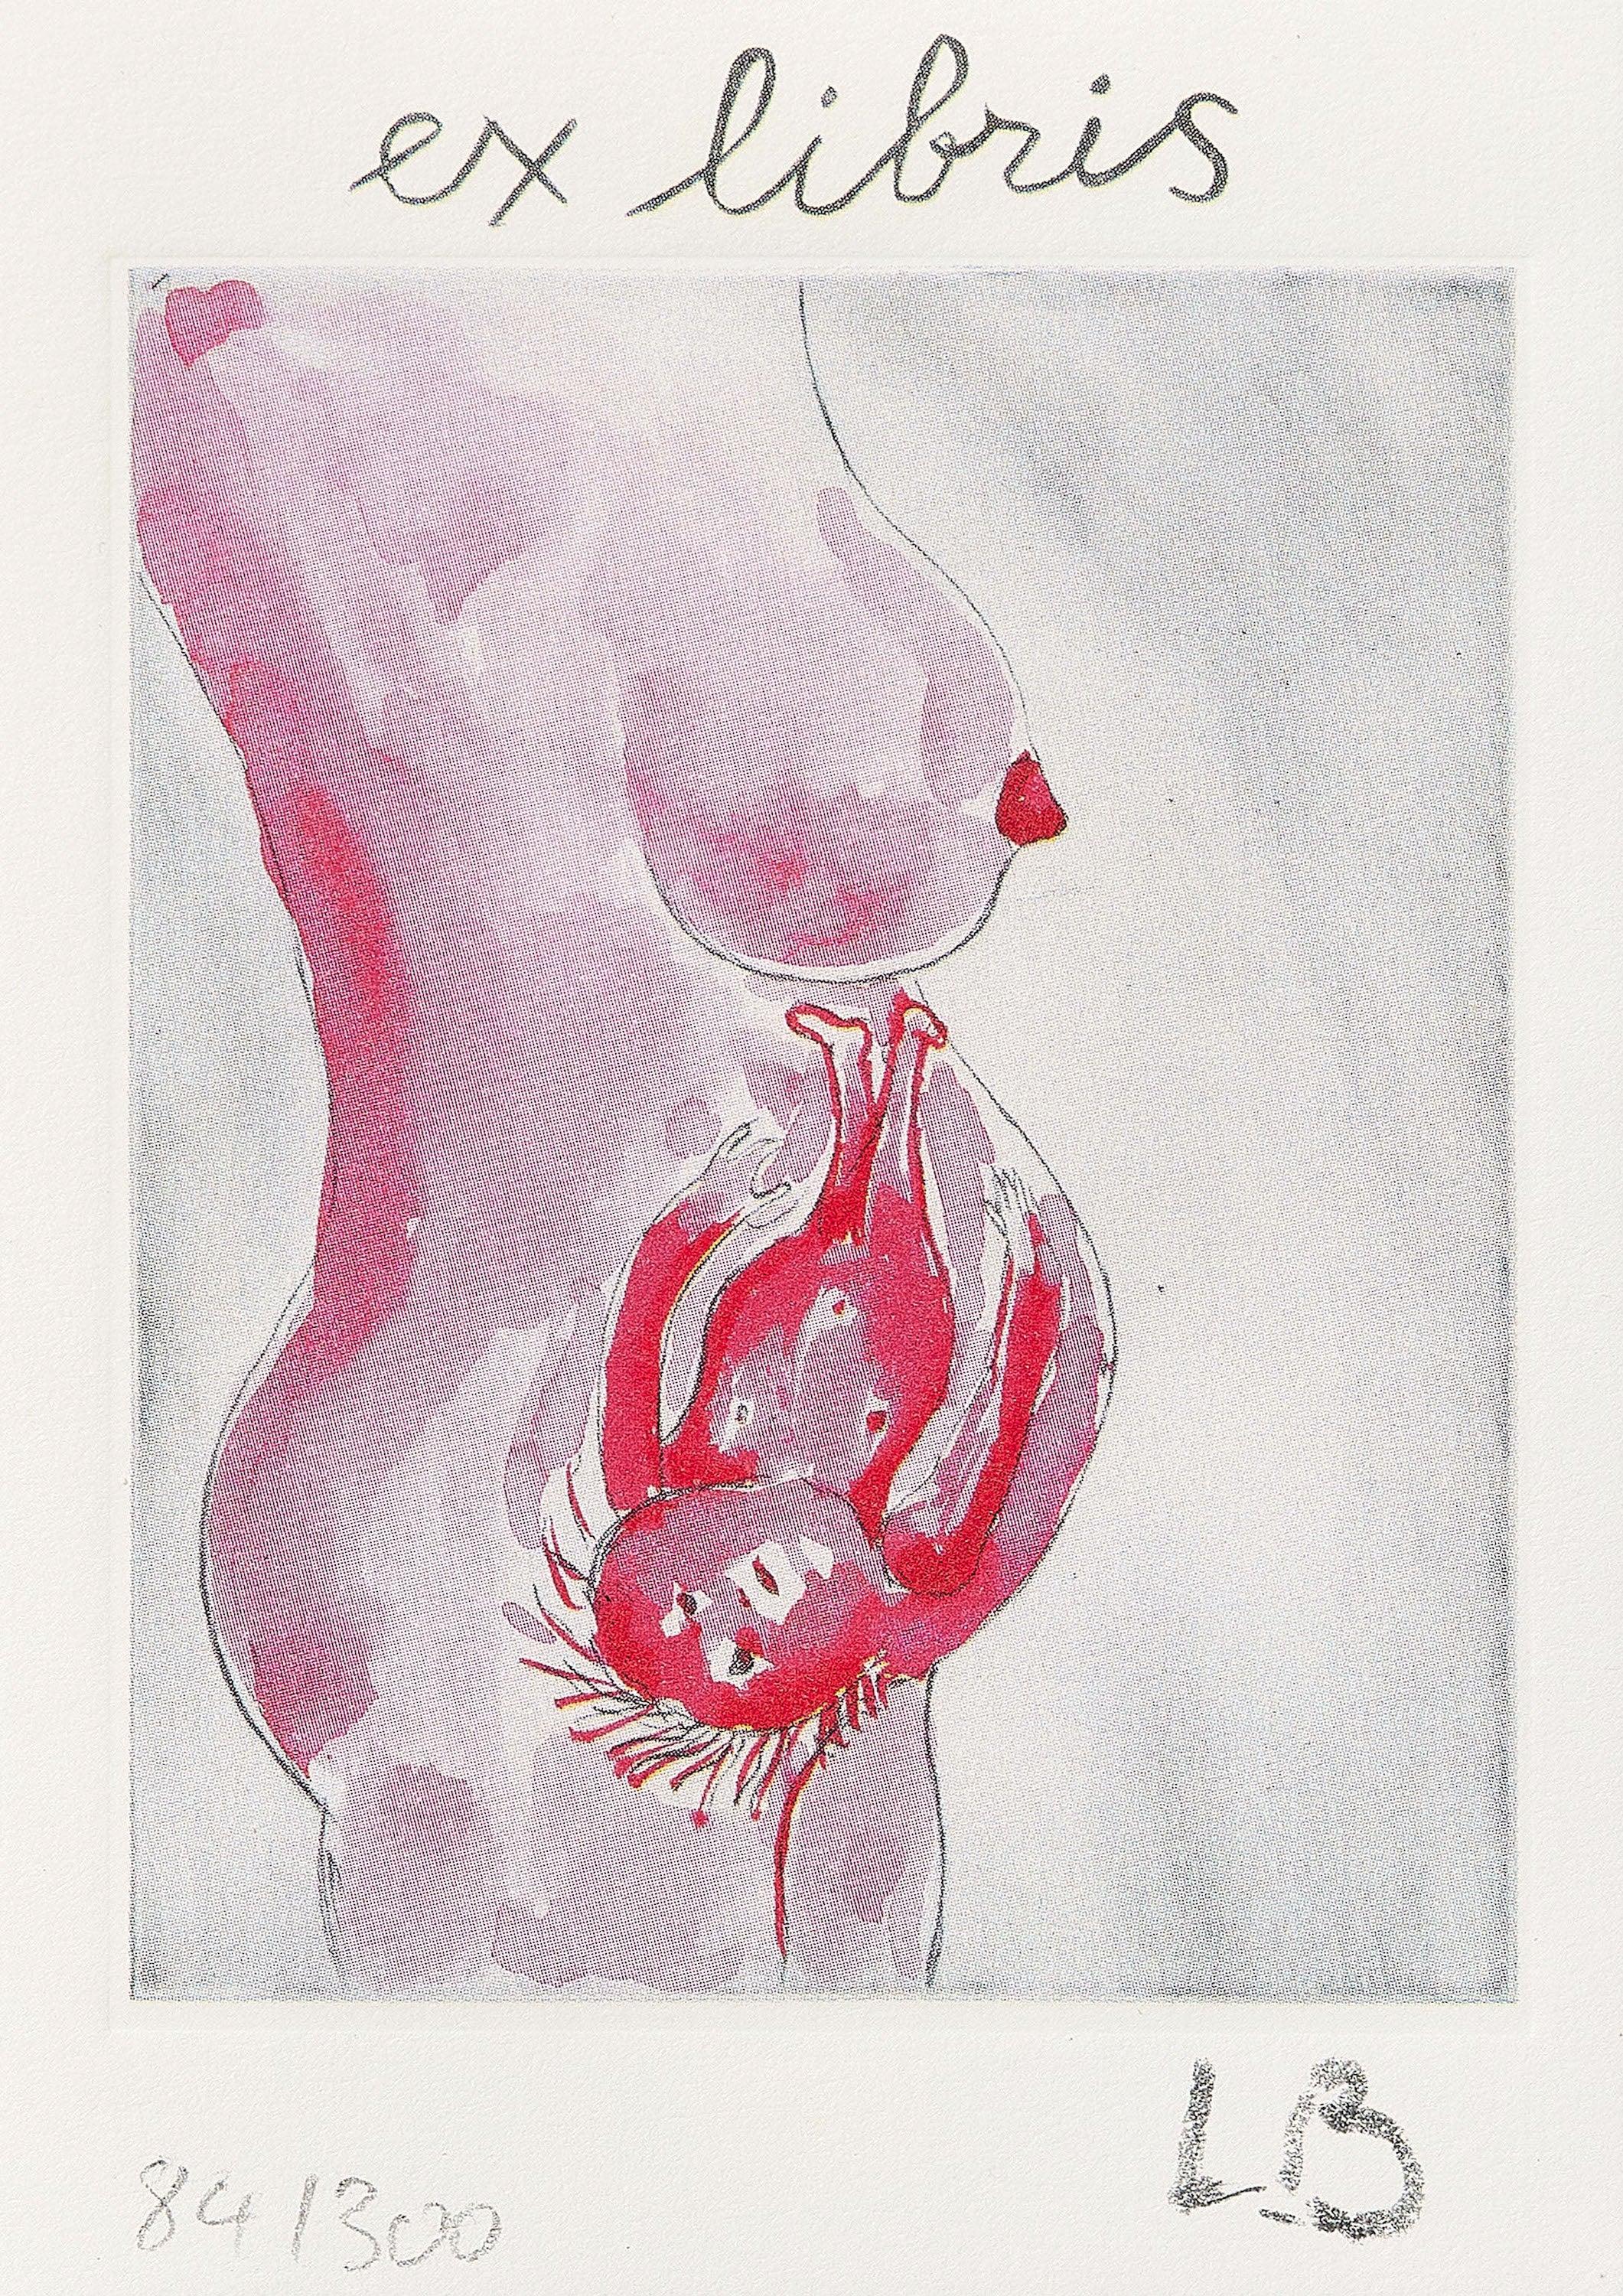 The Reticent Child (Ex Libris), 2005
Louise Bourgeois

Lithograph with embossing in colours, on wove
Signed and numbered from the edition of 300
Printed by Martin Kätelhön, Cologne
Published by Salon Verlag, Cologne
Bound in 'Recueil des Secrets de